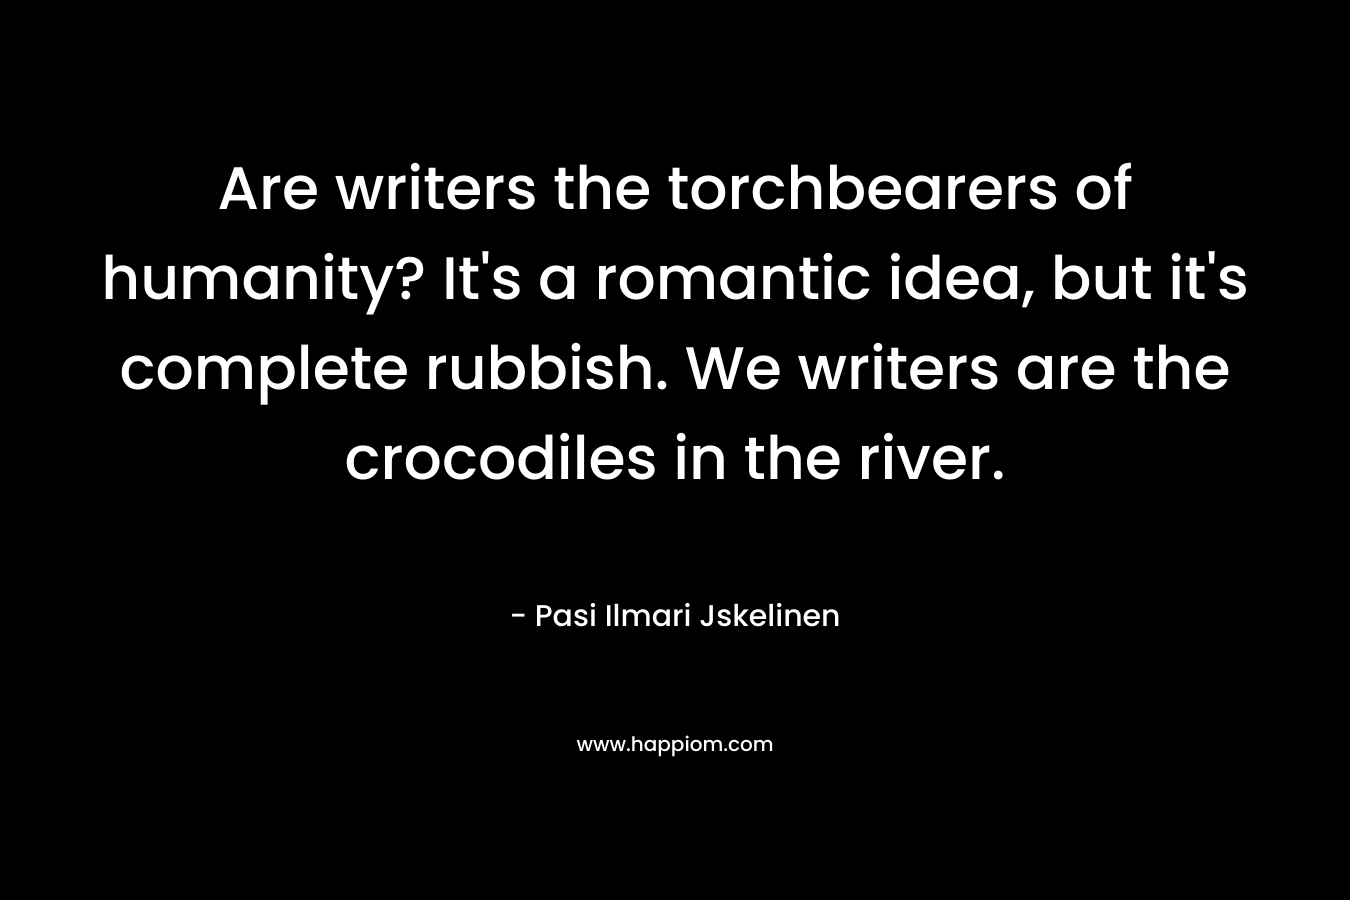 Are writers the torchbearers of humanity? It’s a romantic idea, but it’s complete rubbish. We writers are the crocodiles in the river. – Pasi Ilmari Jskelinen